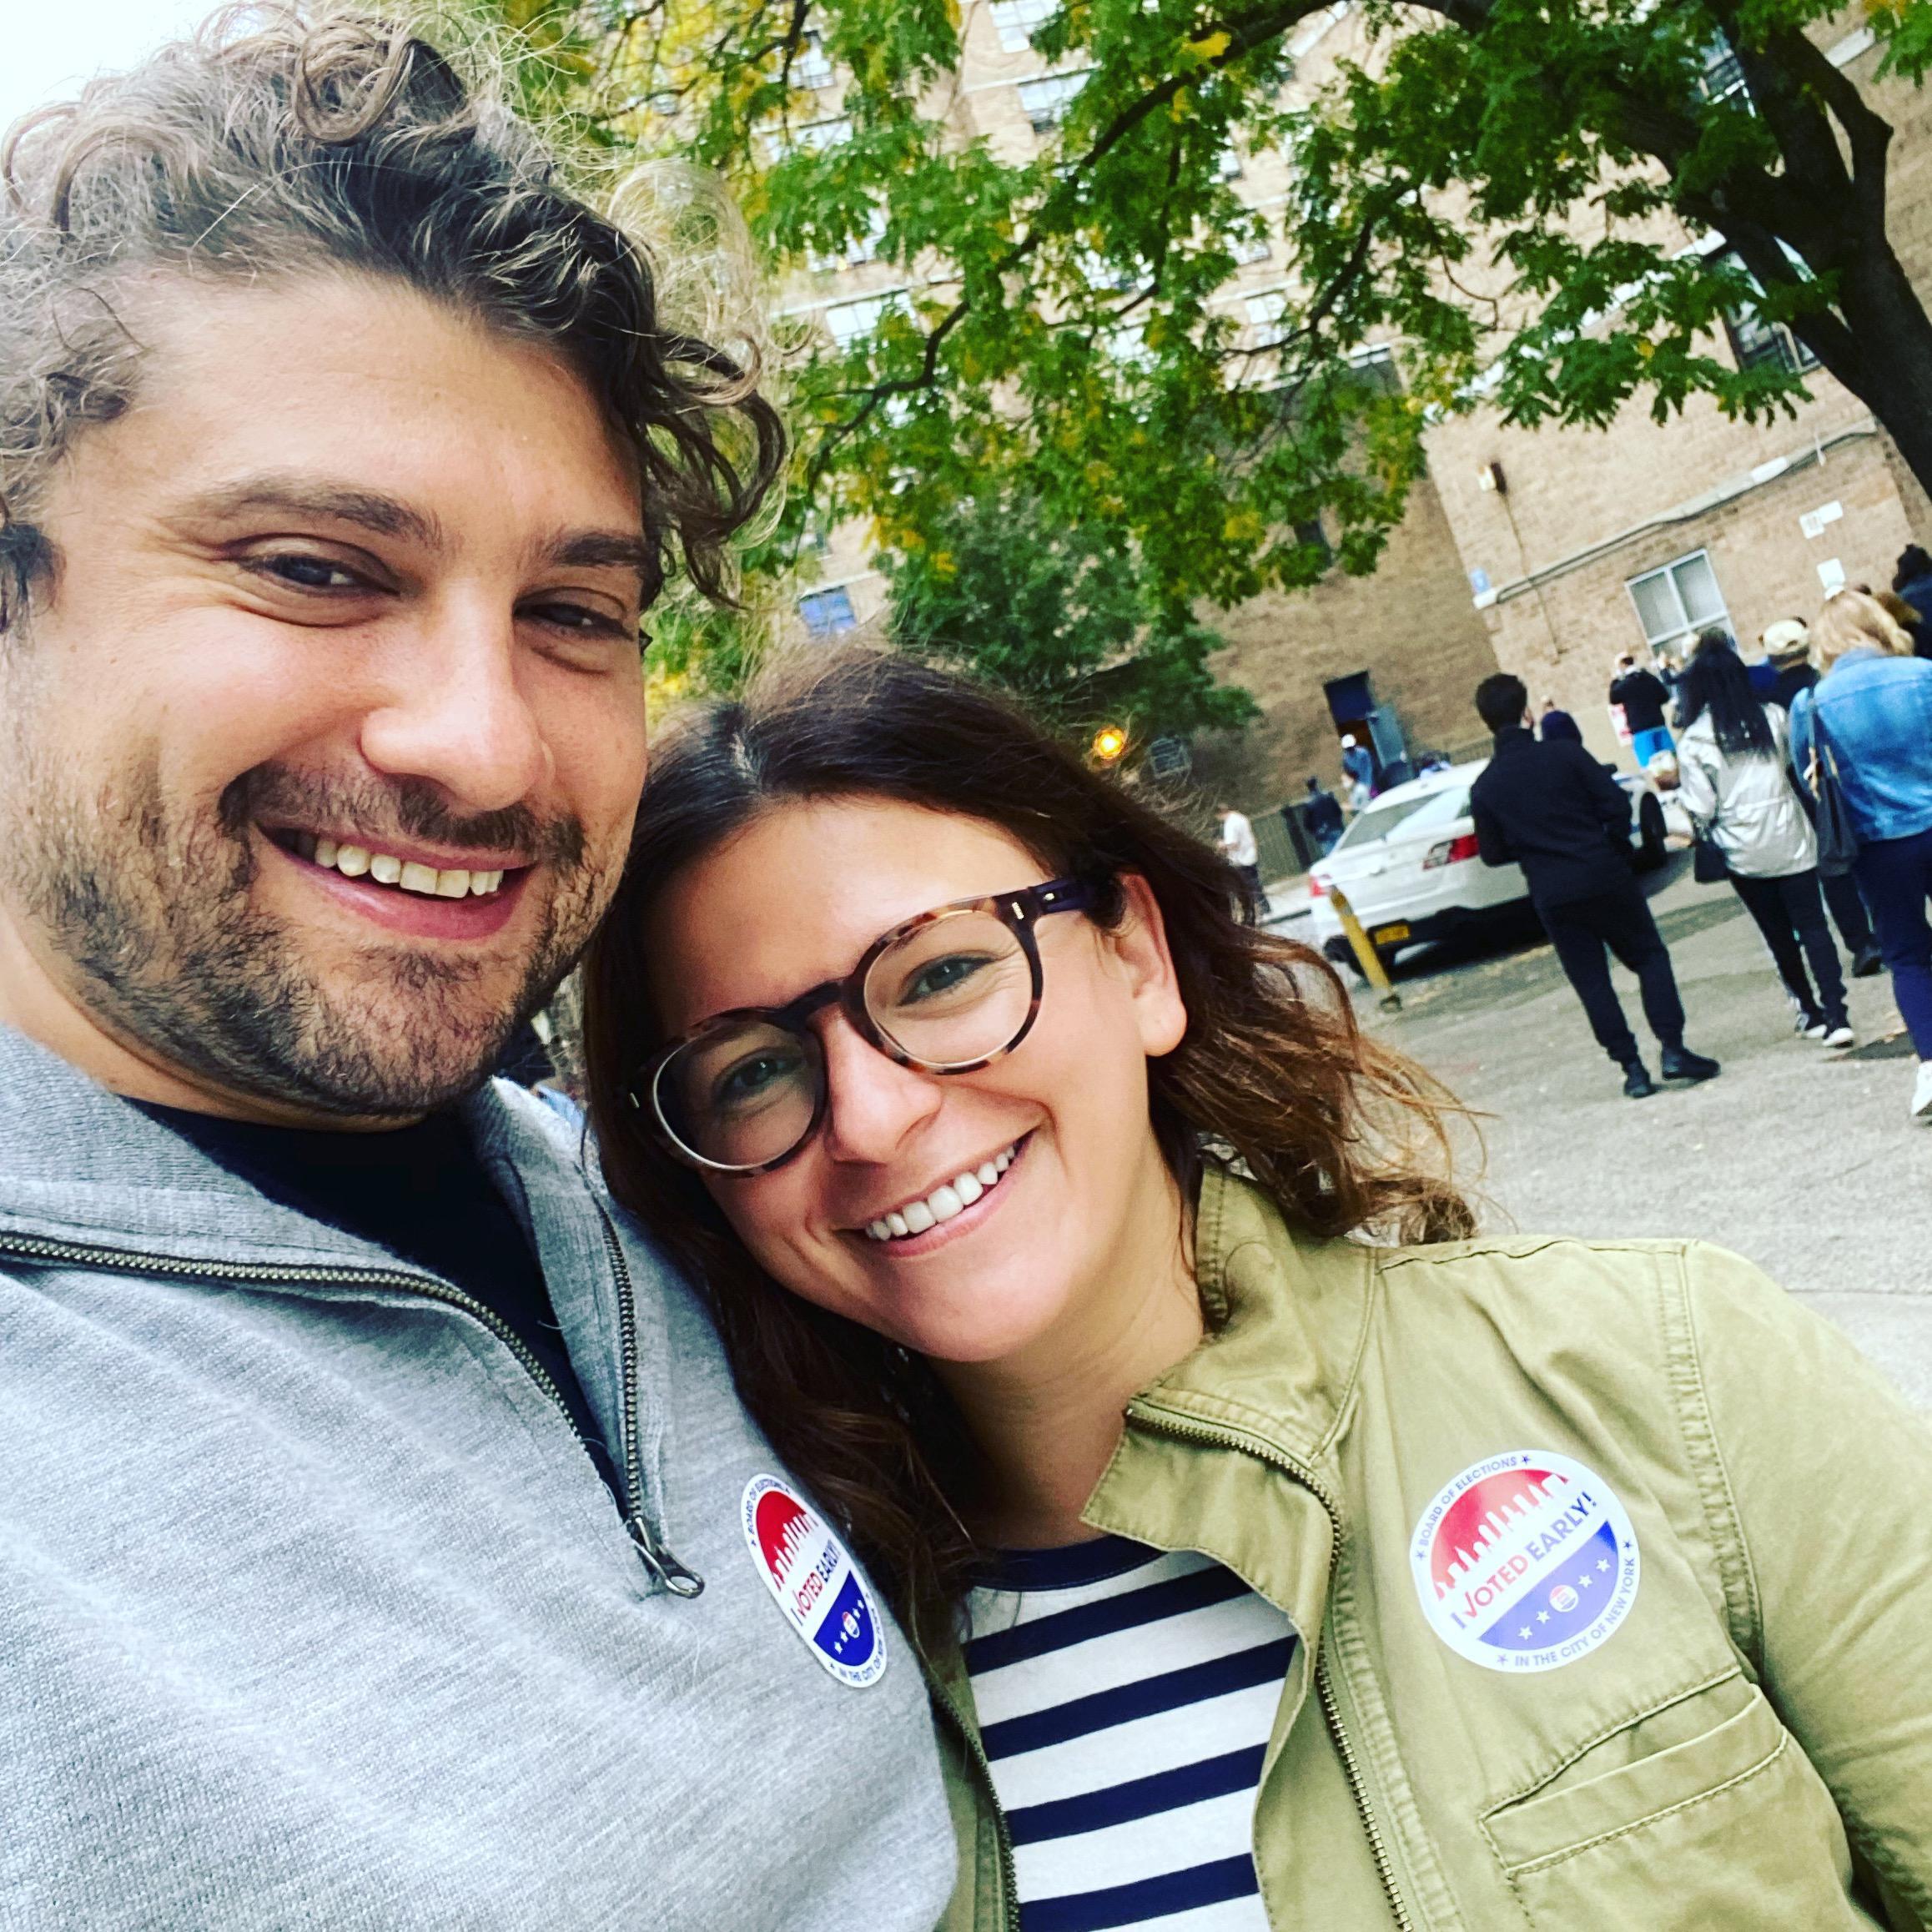 We voted! Thank god we didn't have to move to another country..